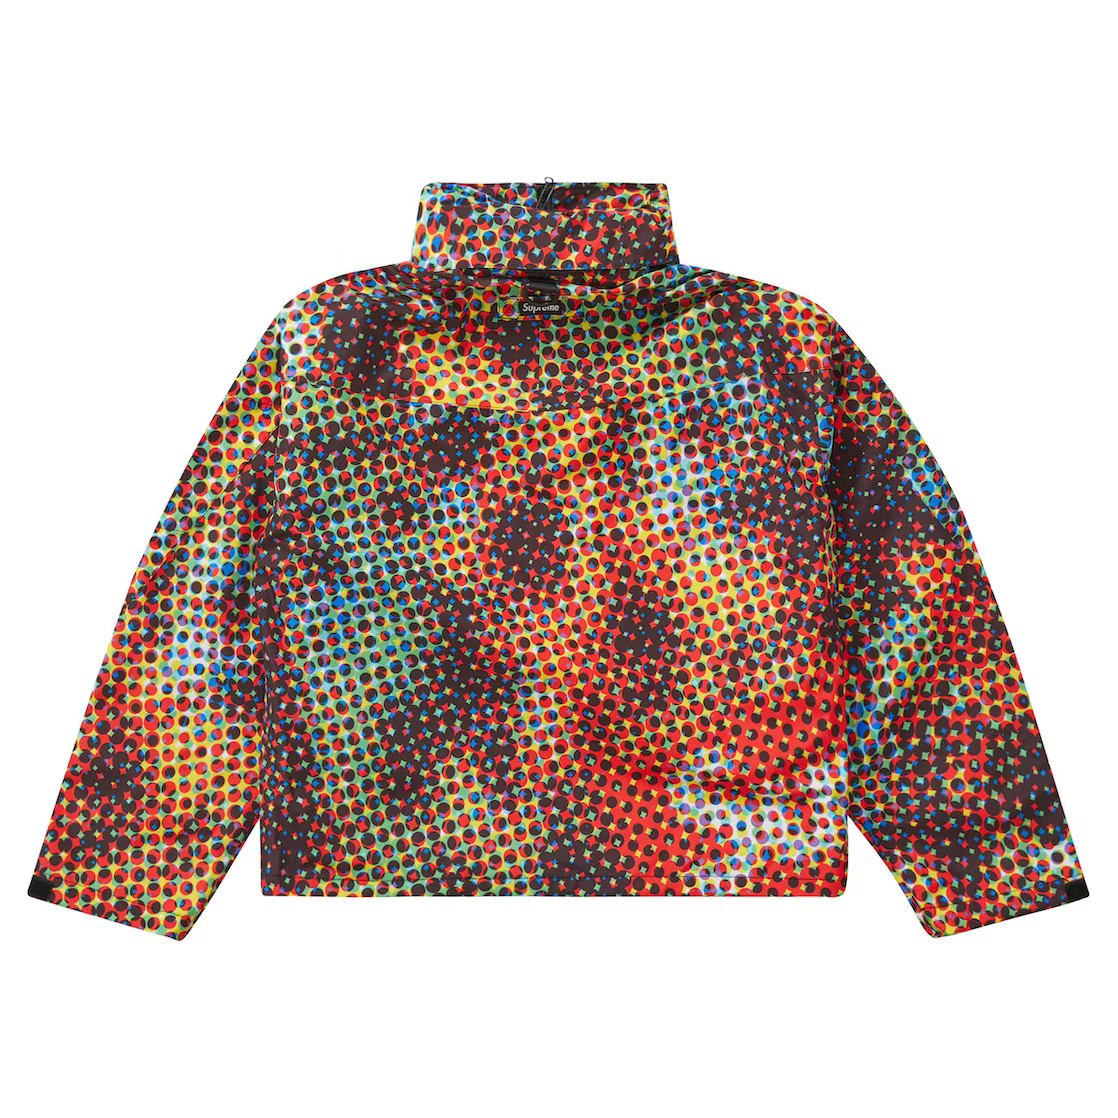 Supreme GORE-TEX PACLITE Lightweight Shell Jacket Multicolor